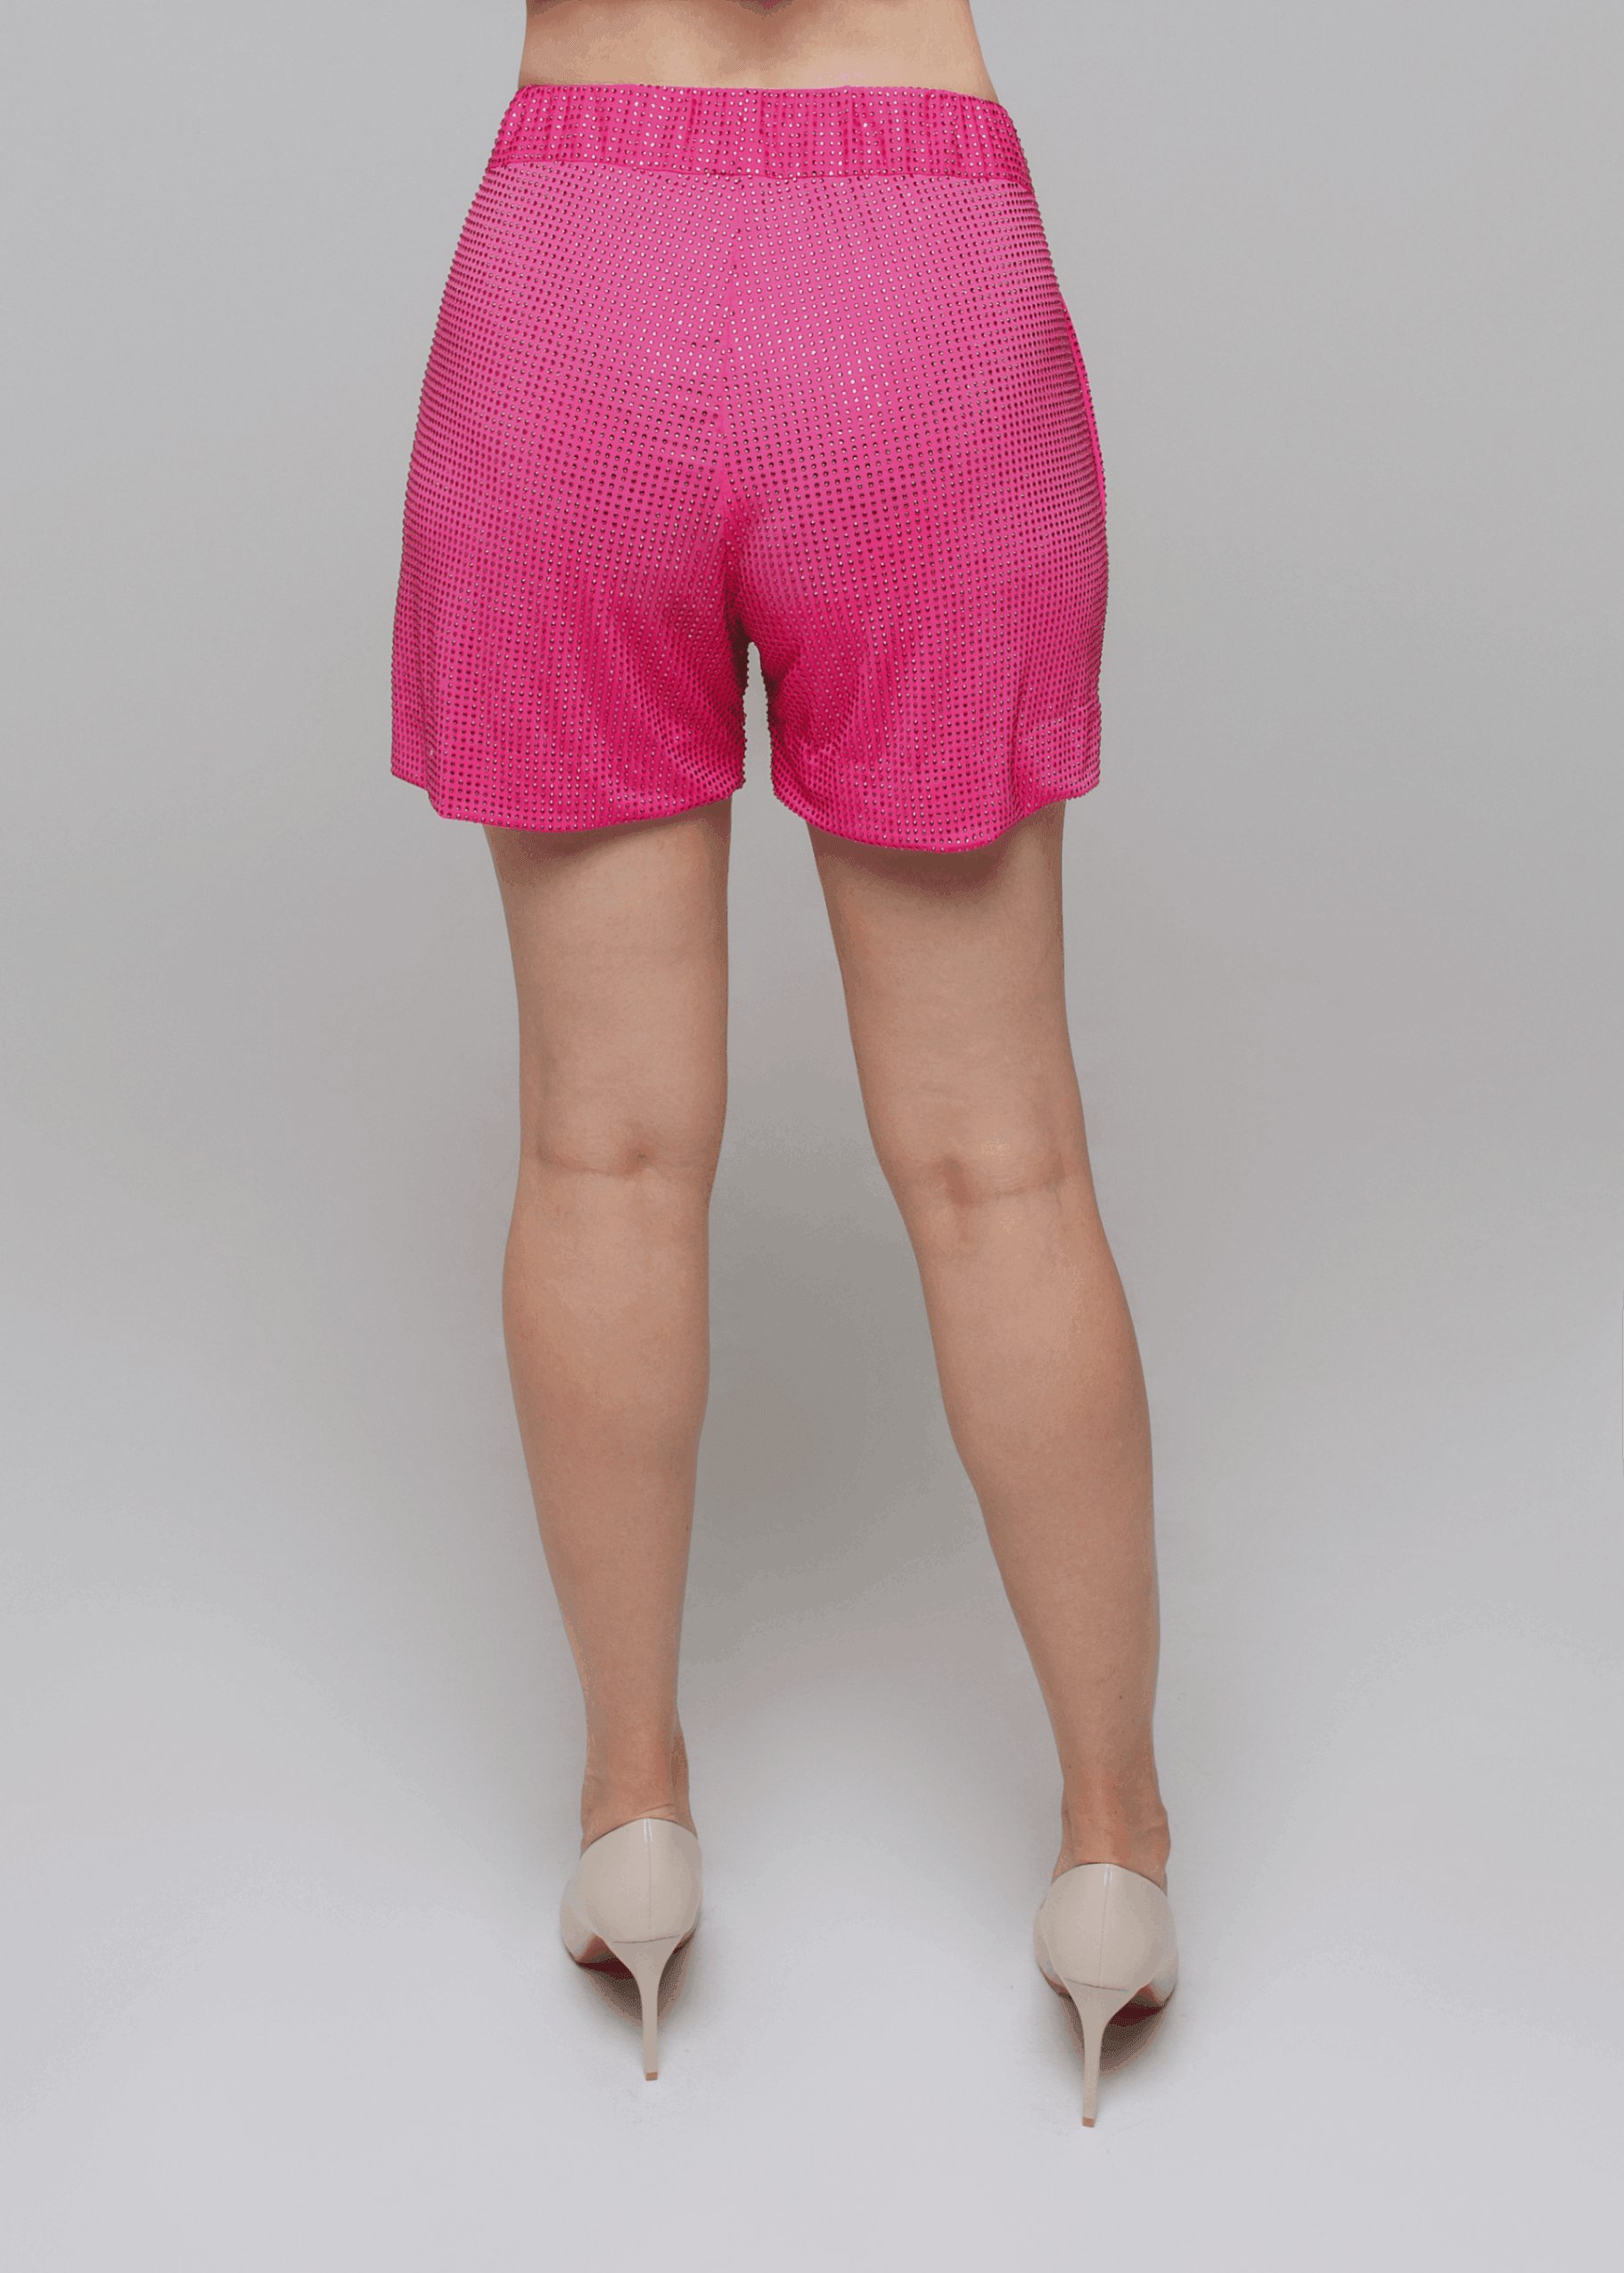 Exquisite detail of Crystal Shorts showcasing the fine craftsmanship and elegant design characteristic of Axinia Collection 's luxury collection.